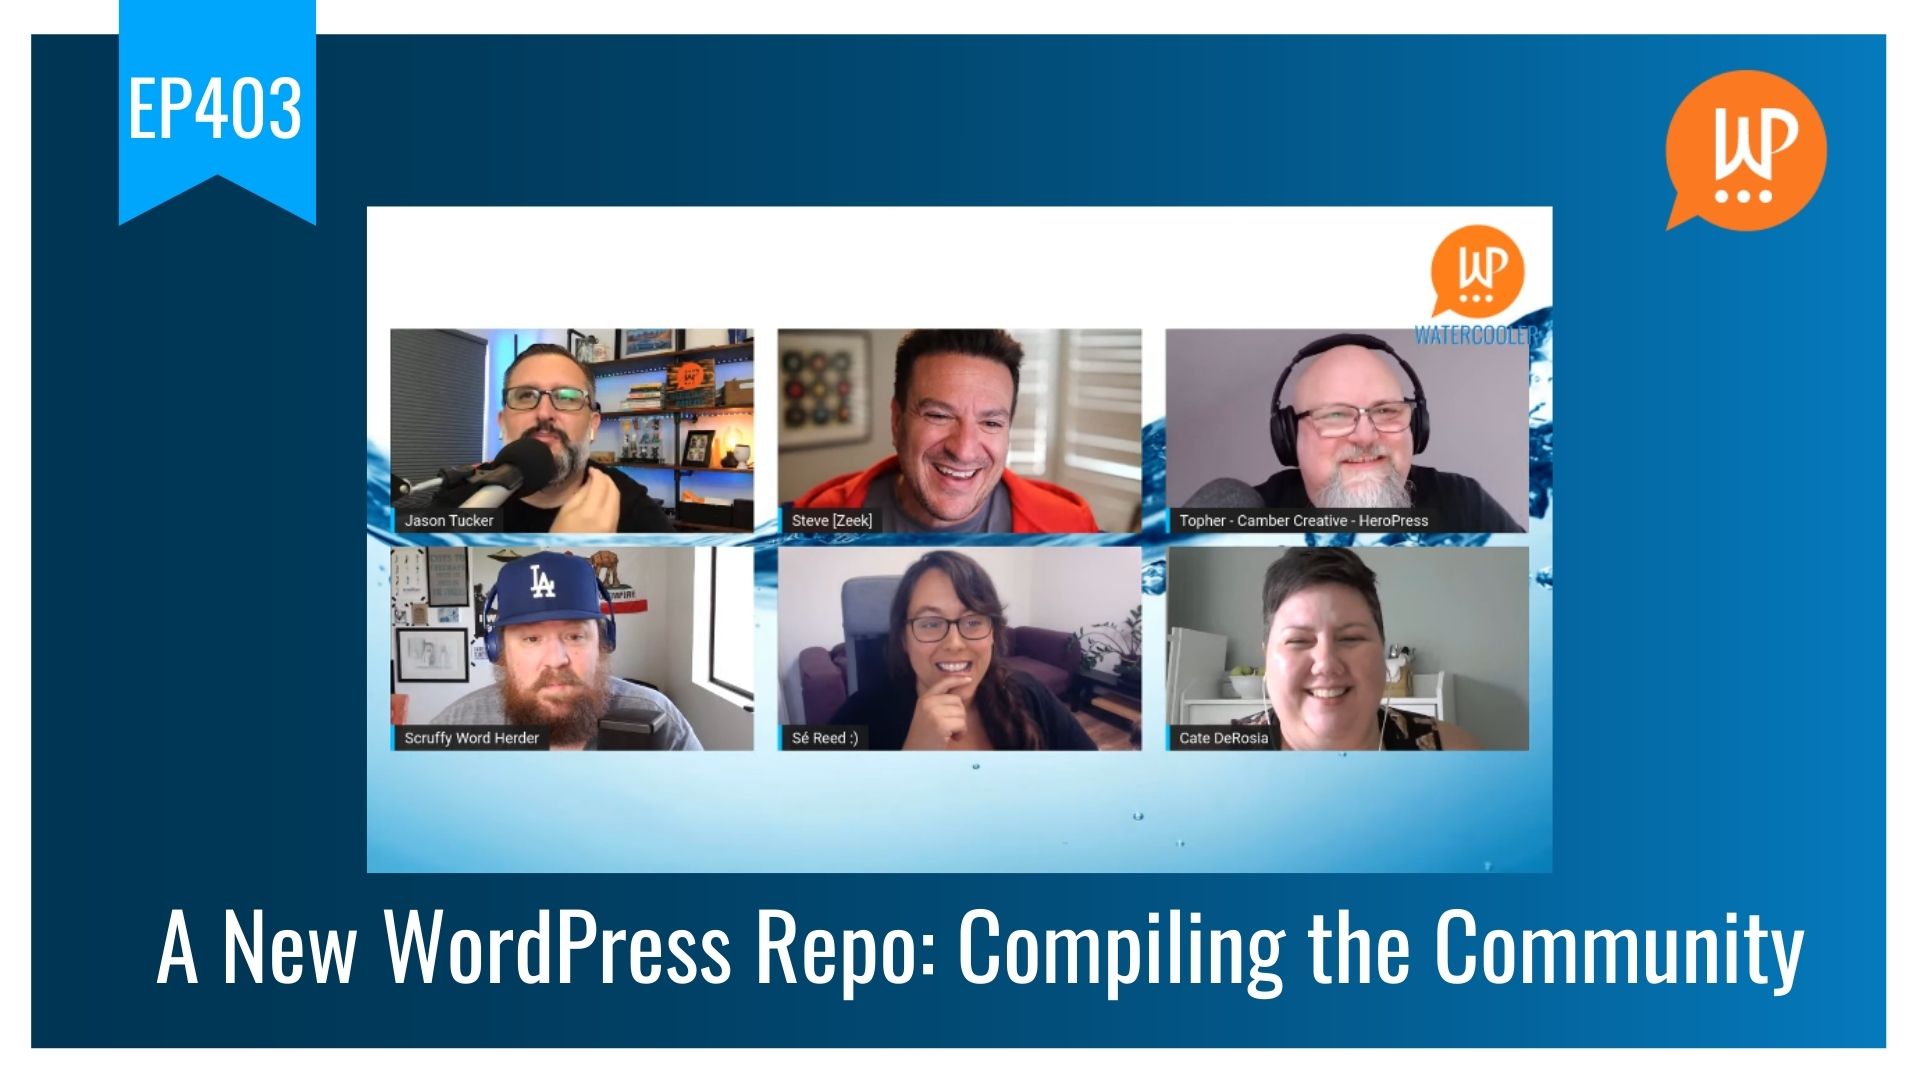 EP403 - A New WordPress Repo: Compiling the Community - WPwatercooler